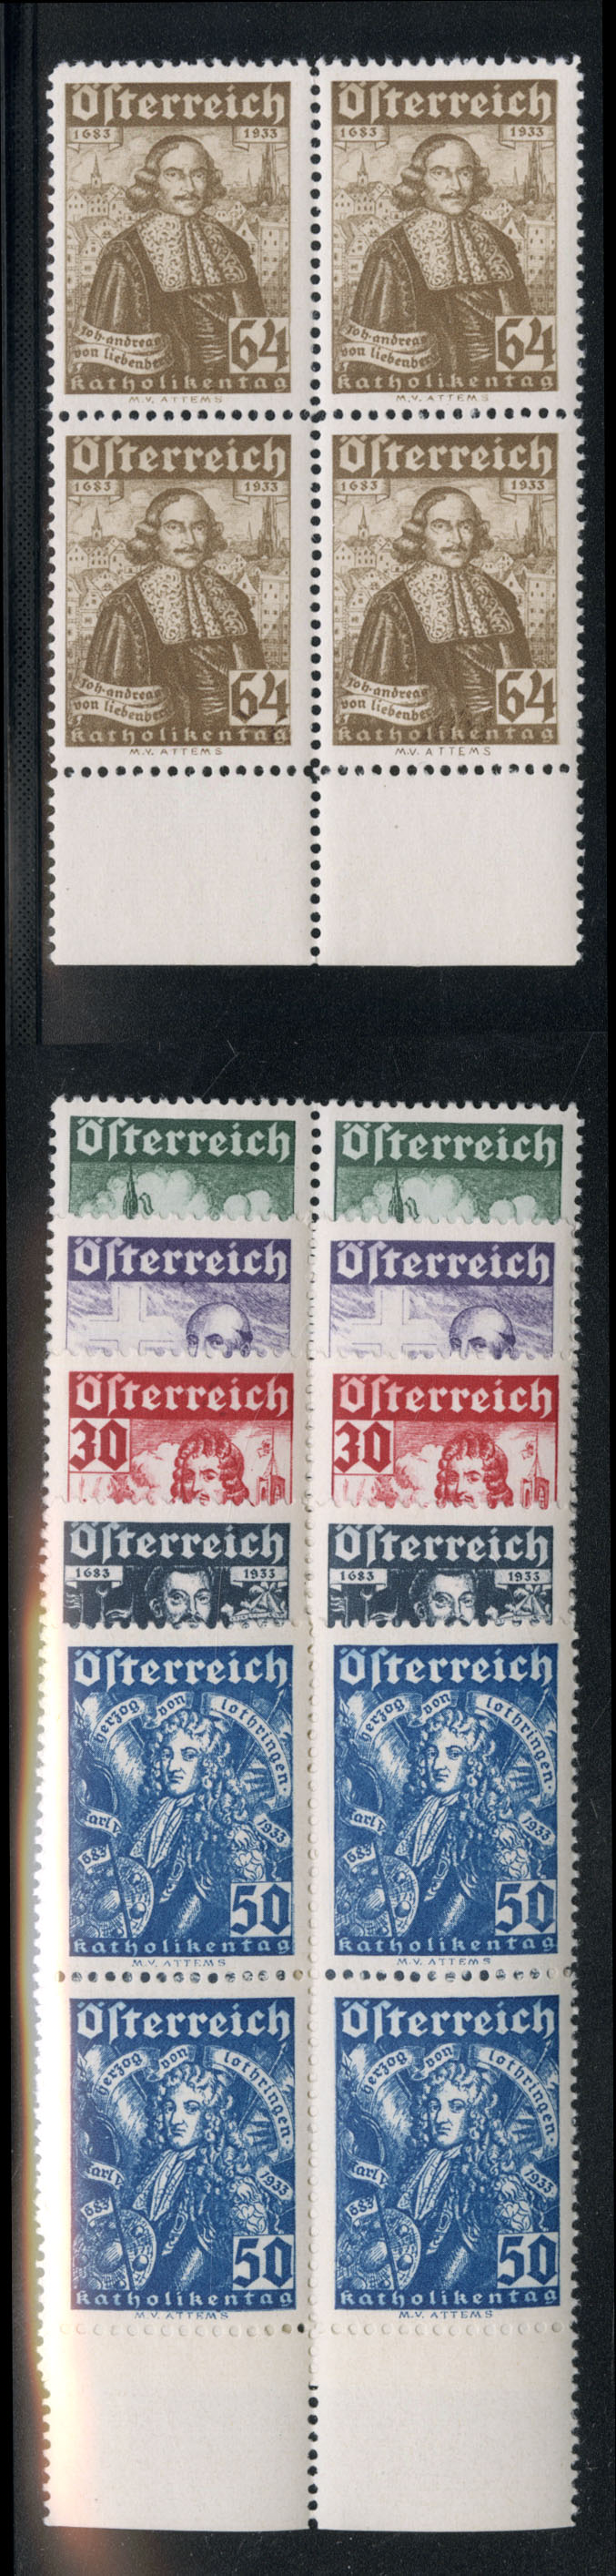 Lot 264 - AUSTRIA Austria - Post WWII Local Issues - Dorfstetten  -  Cherrystone Auctions U.S. & Worldwide Stamps & Postal History